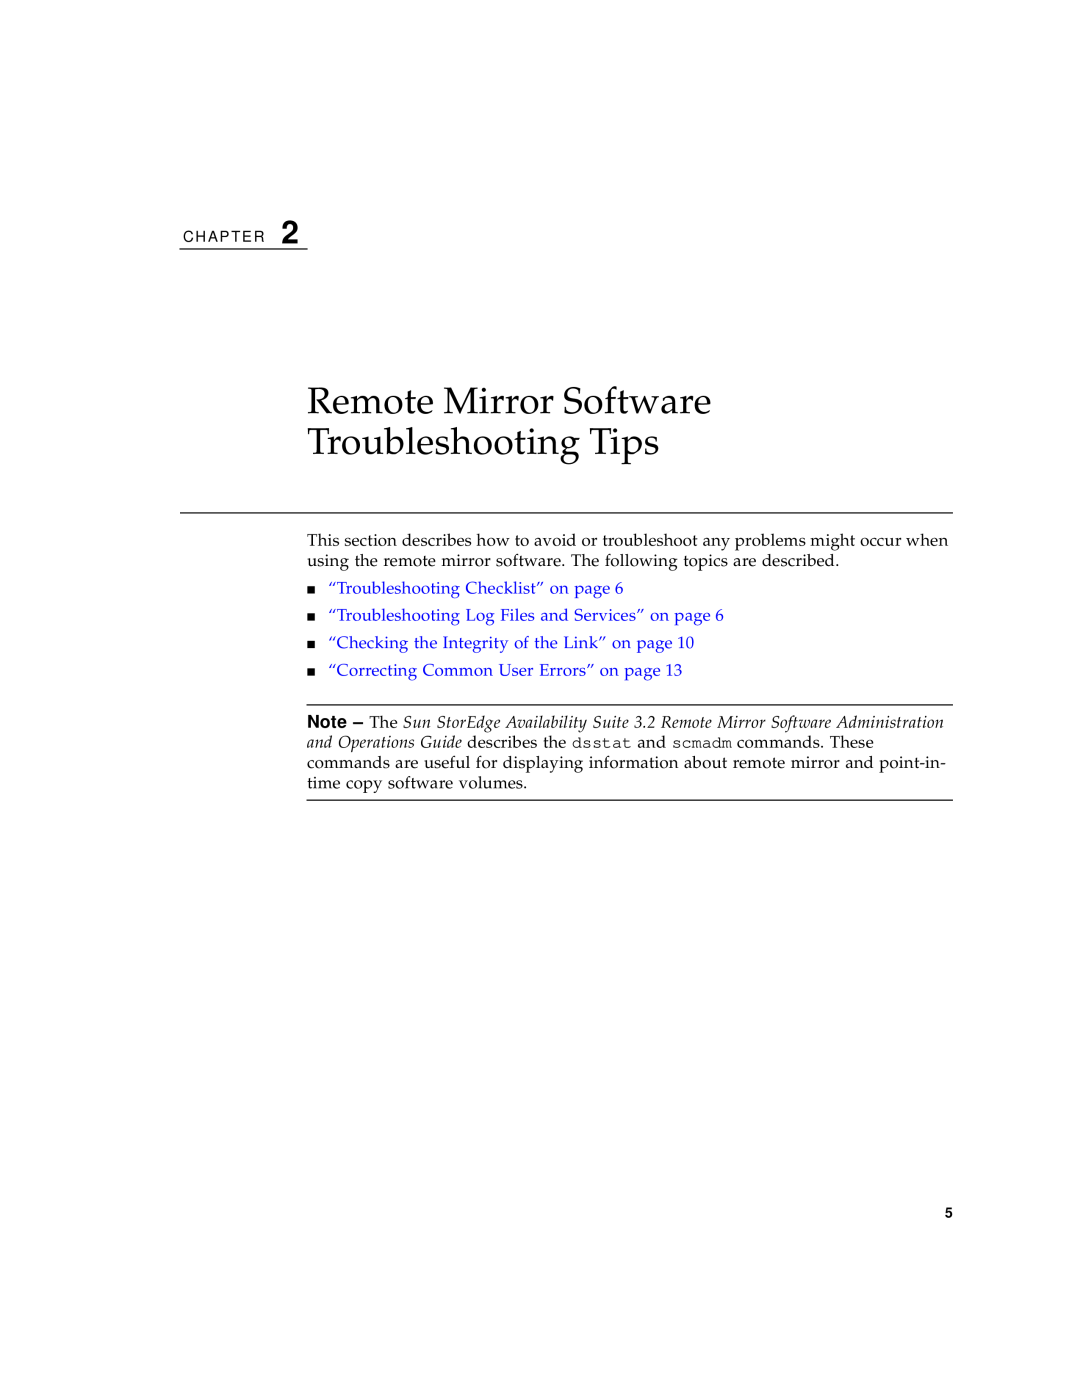 Sun Microsystems 3.2 manual Remote Mirror Software Troubleshooting Tips, “Troubleshooting Log Files and Services” on page 